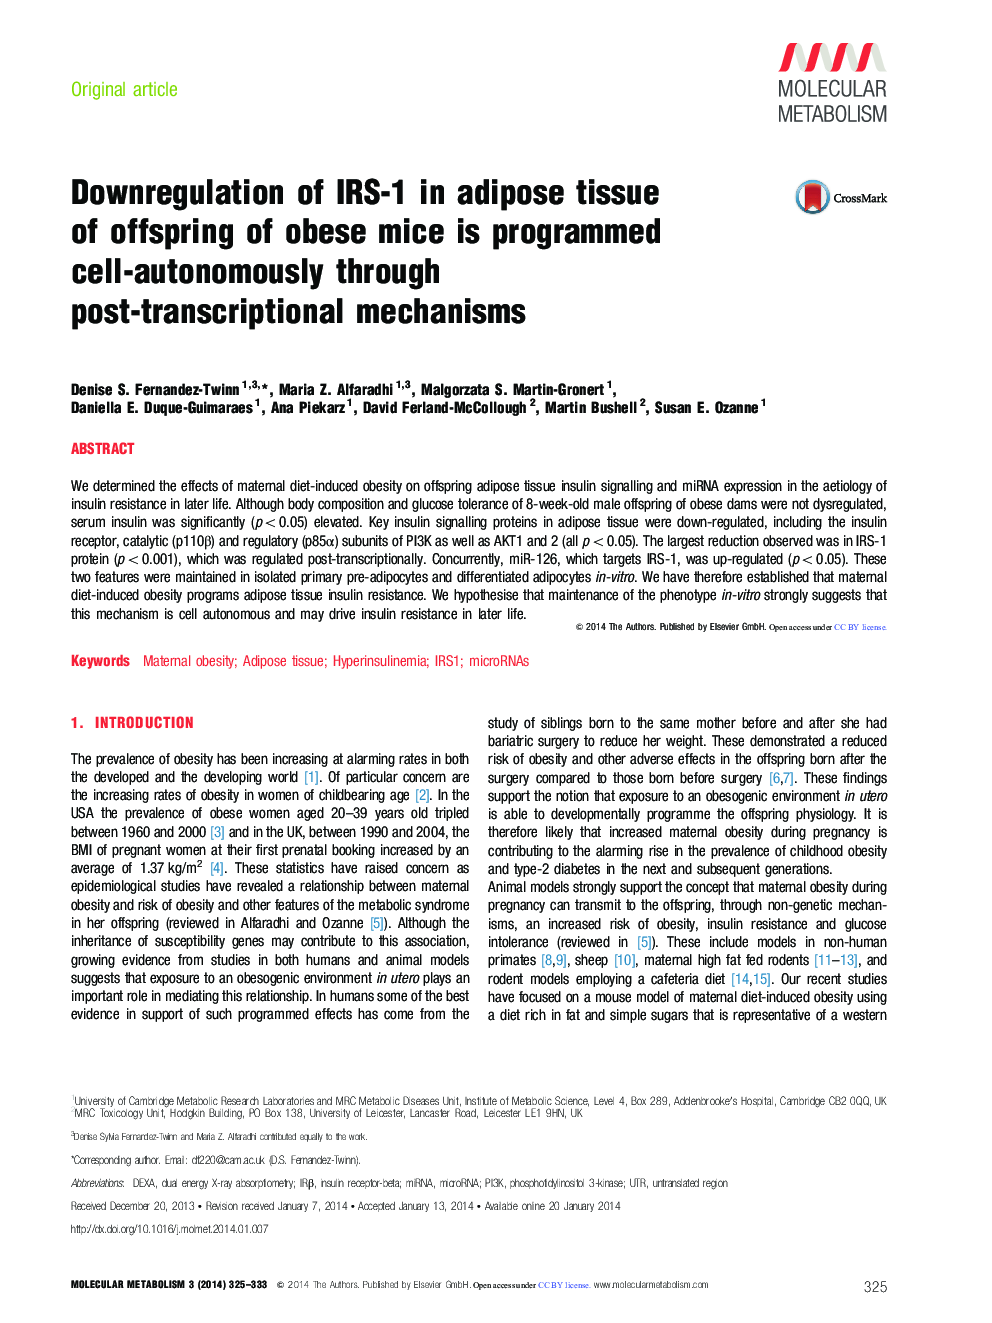 Downregulation of IRS-1 in adipose tissue of offspring of obese mice is programmed cell-autonomously through post-transcriptional mechanisms